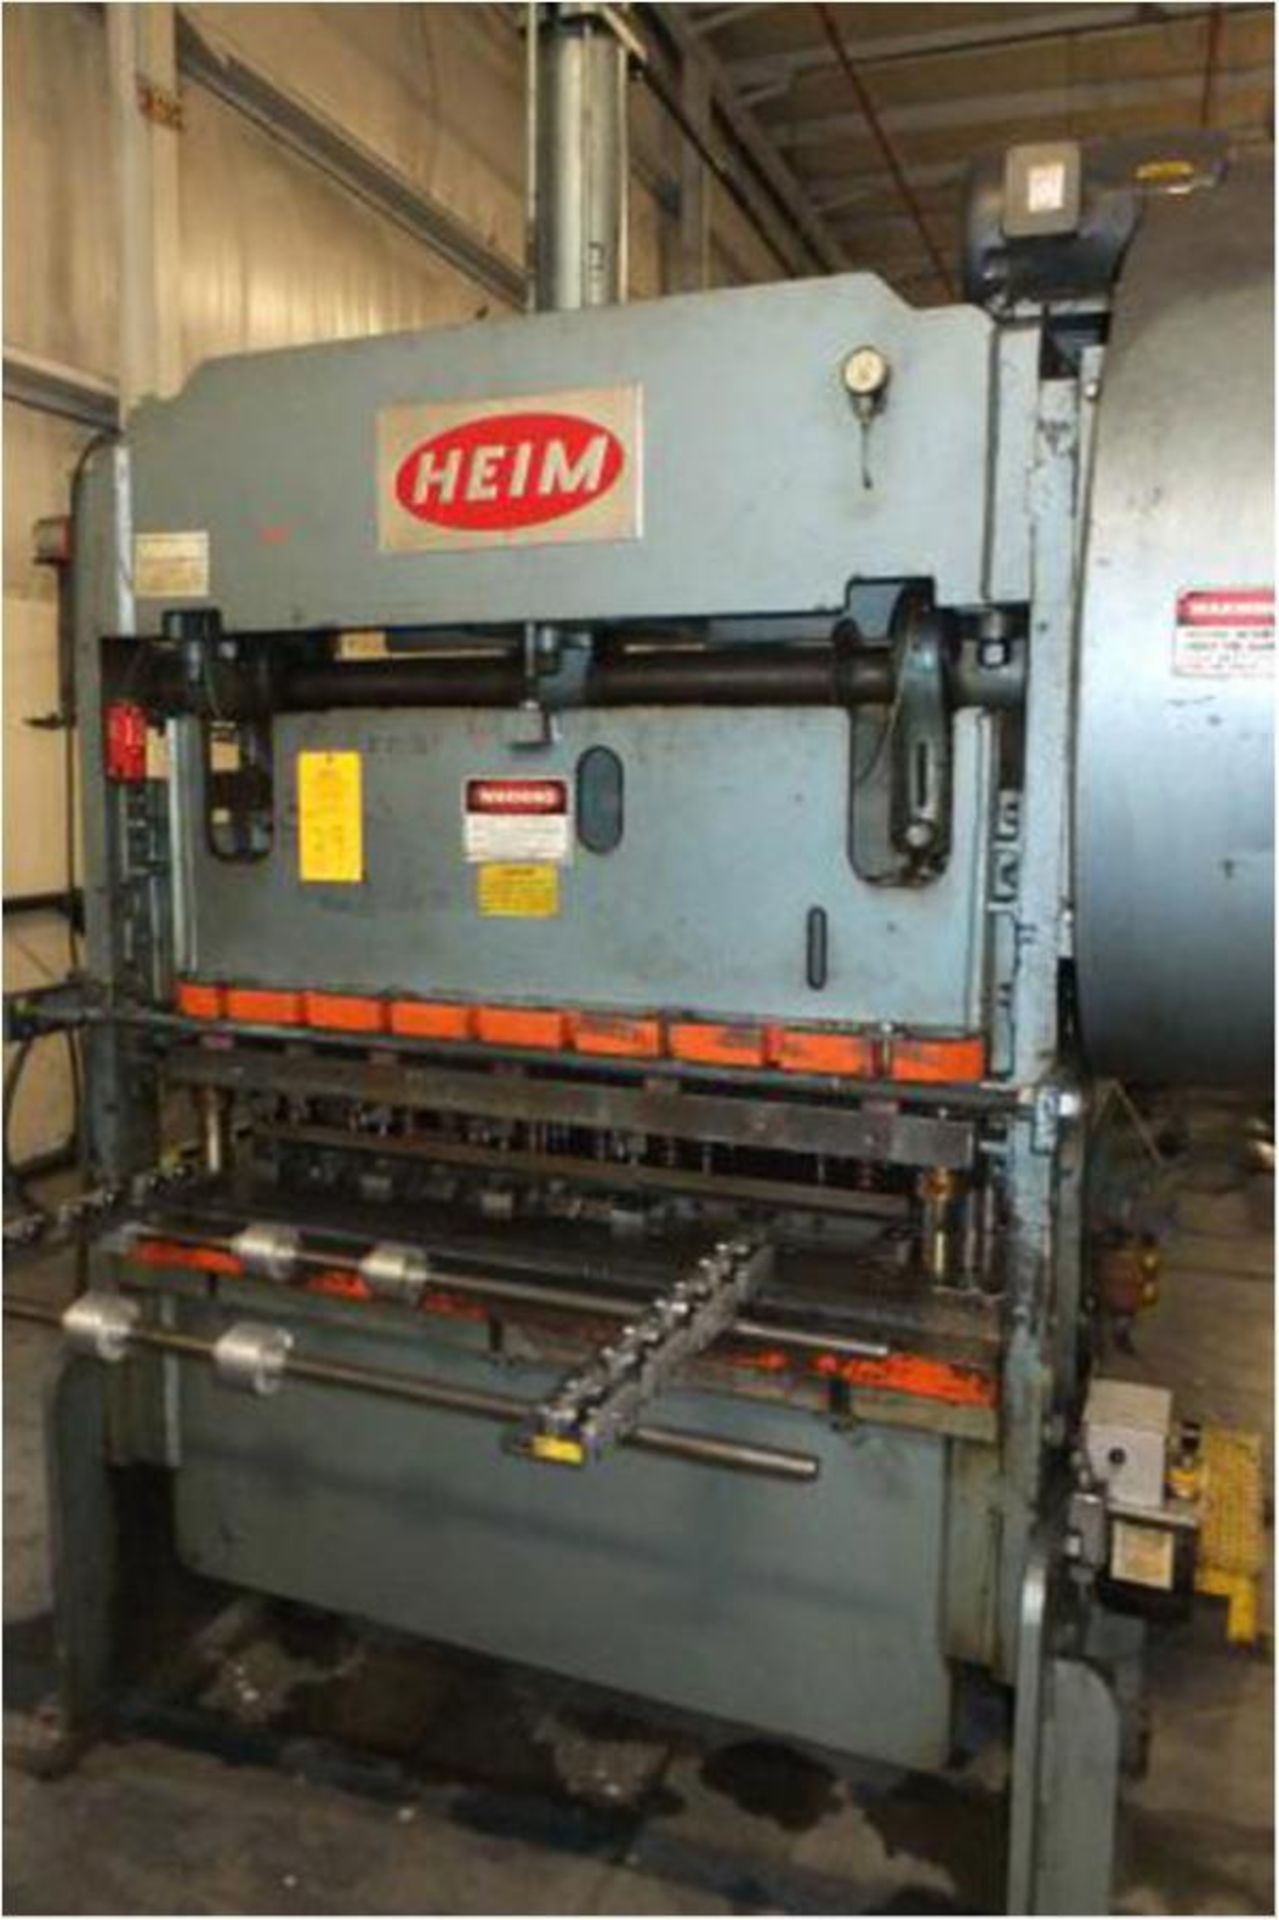 Heim Straight Side Double Crank Press, 40 Ton x 56" x 22", Mdl: S2-40, S/N: H-3668 (6932P) ( - Image 2 of 4